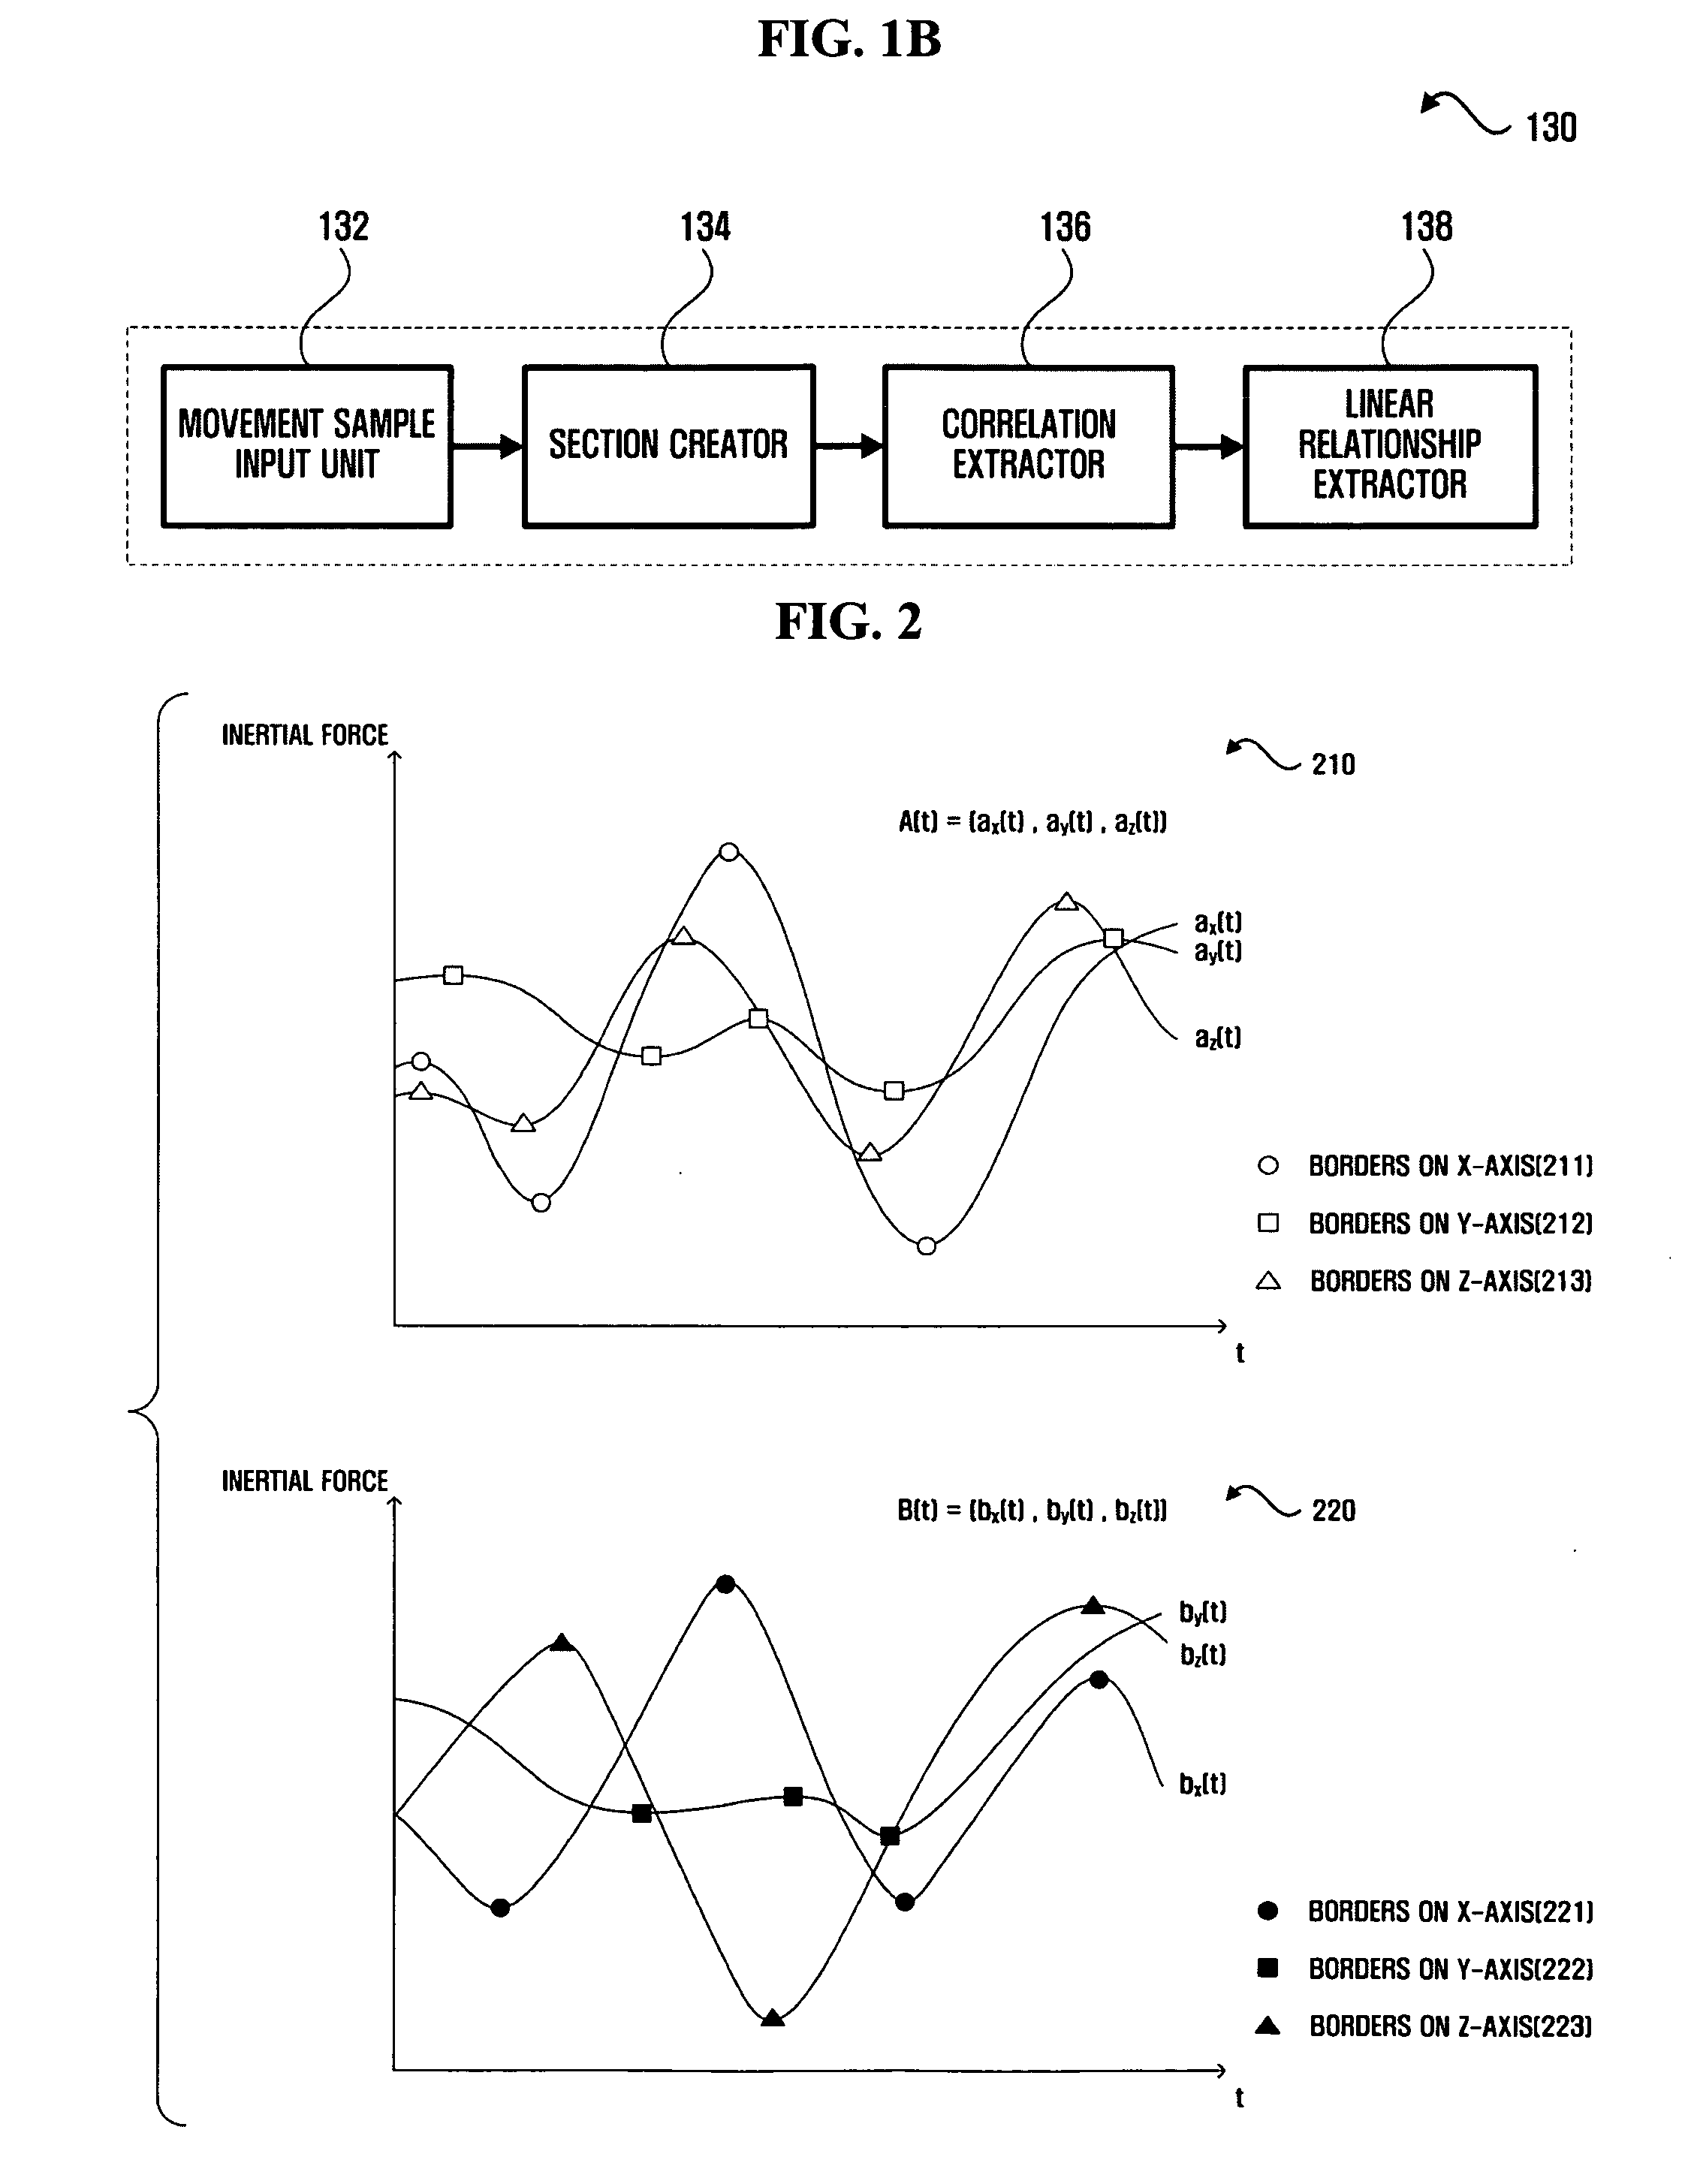 System, medium, and method controlling operation according to instructional movement